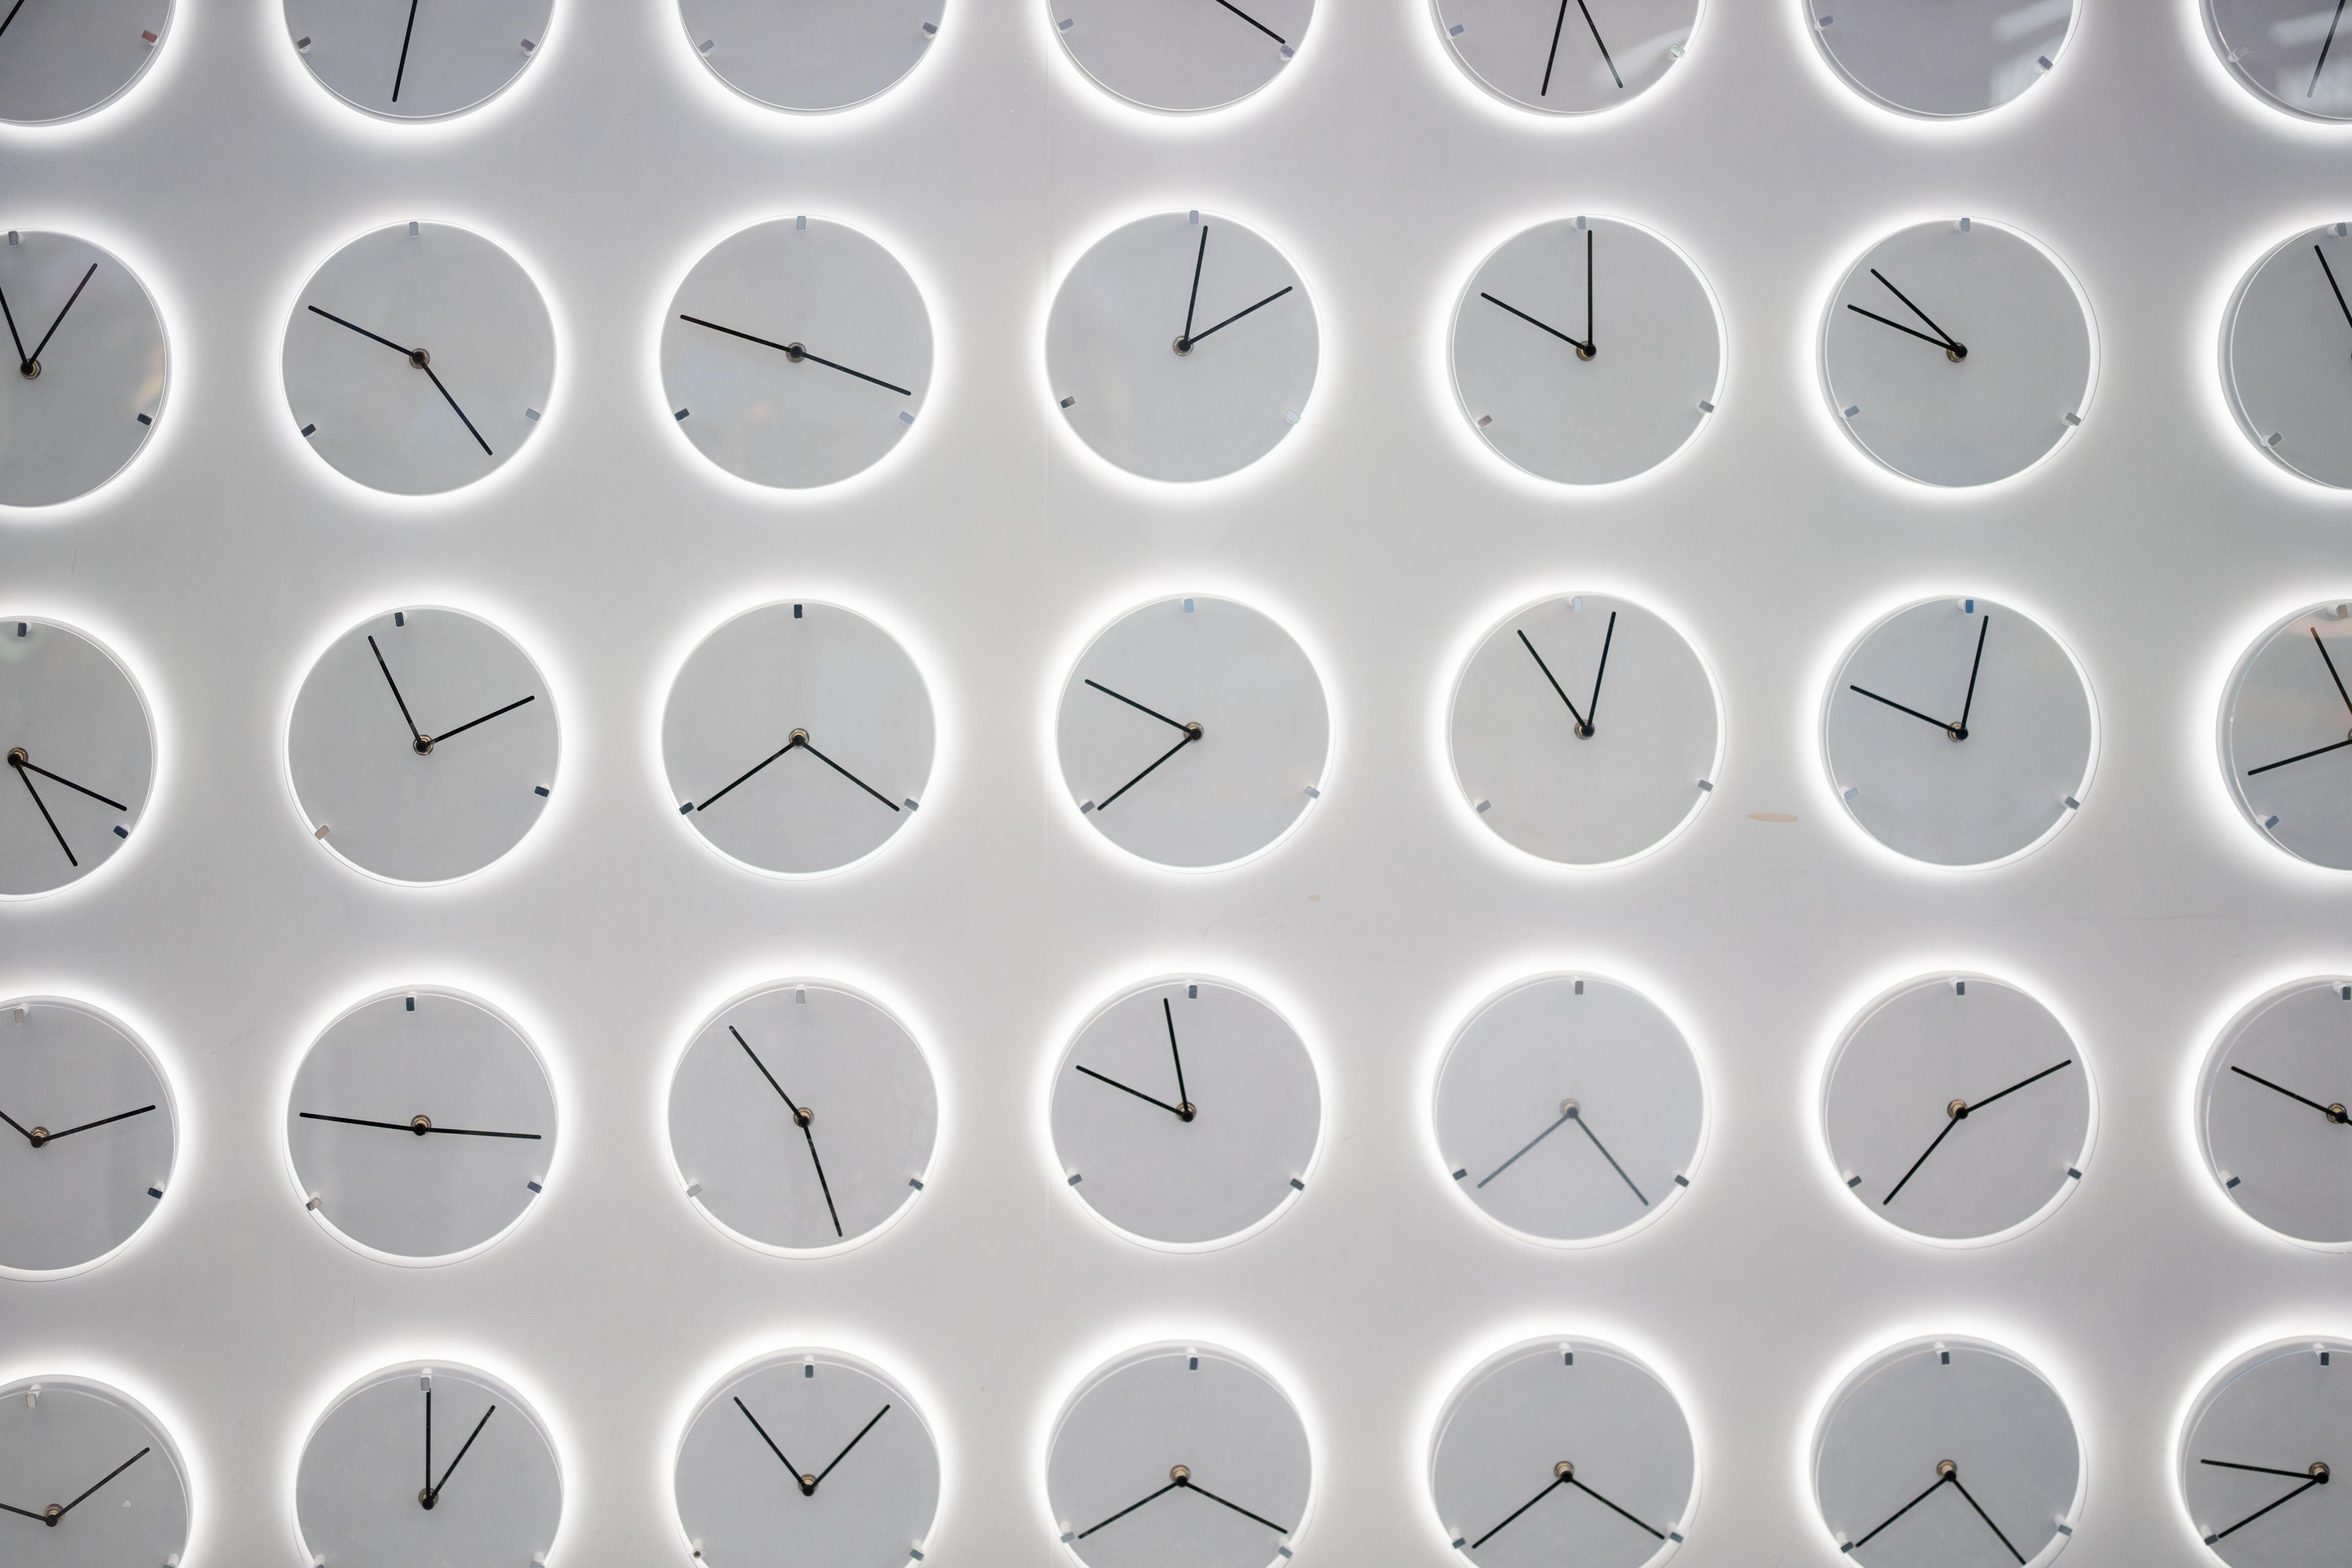 5 rows of identical clocks with different times, each casting a white background as a shadow